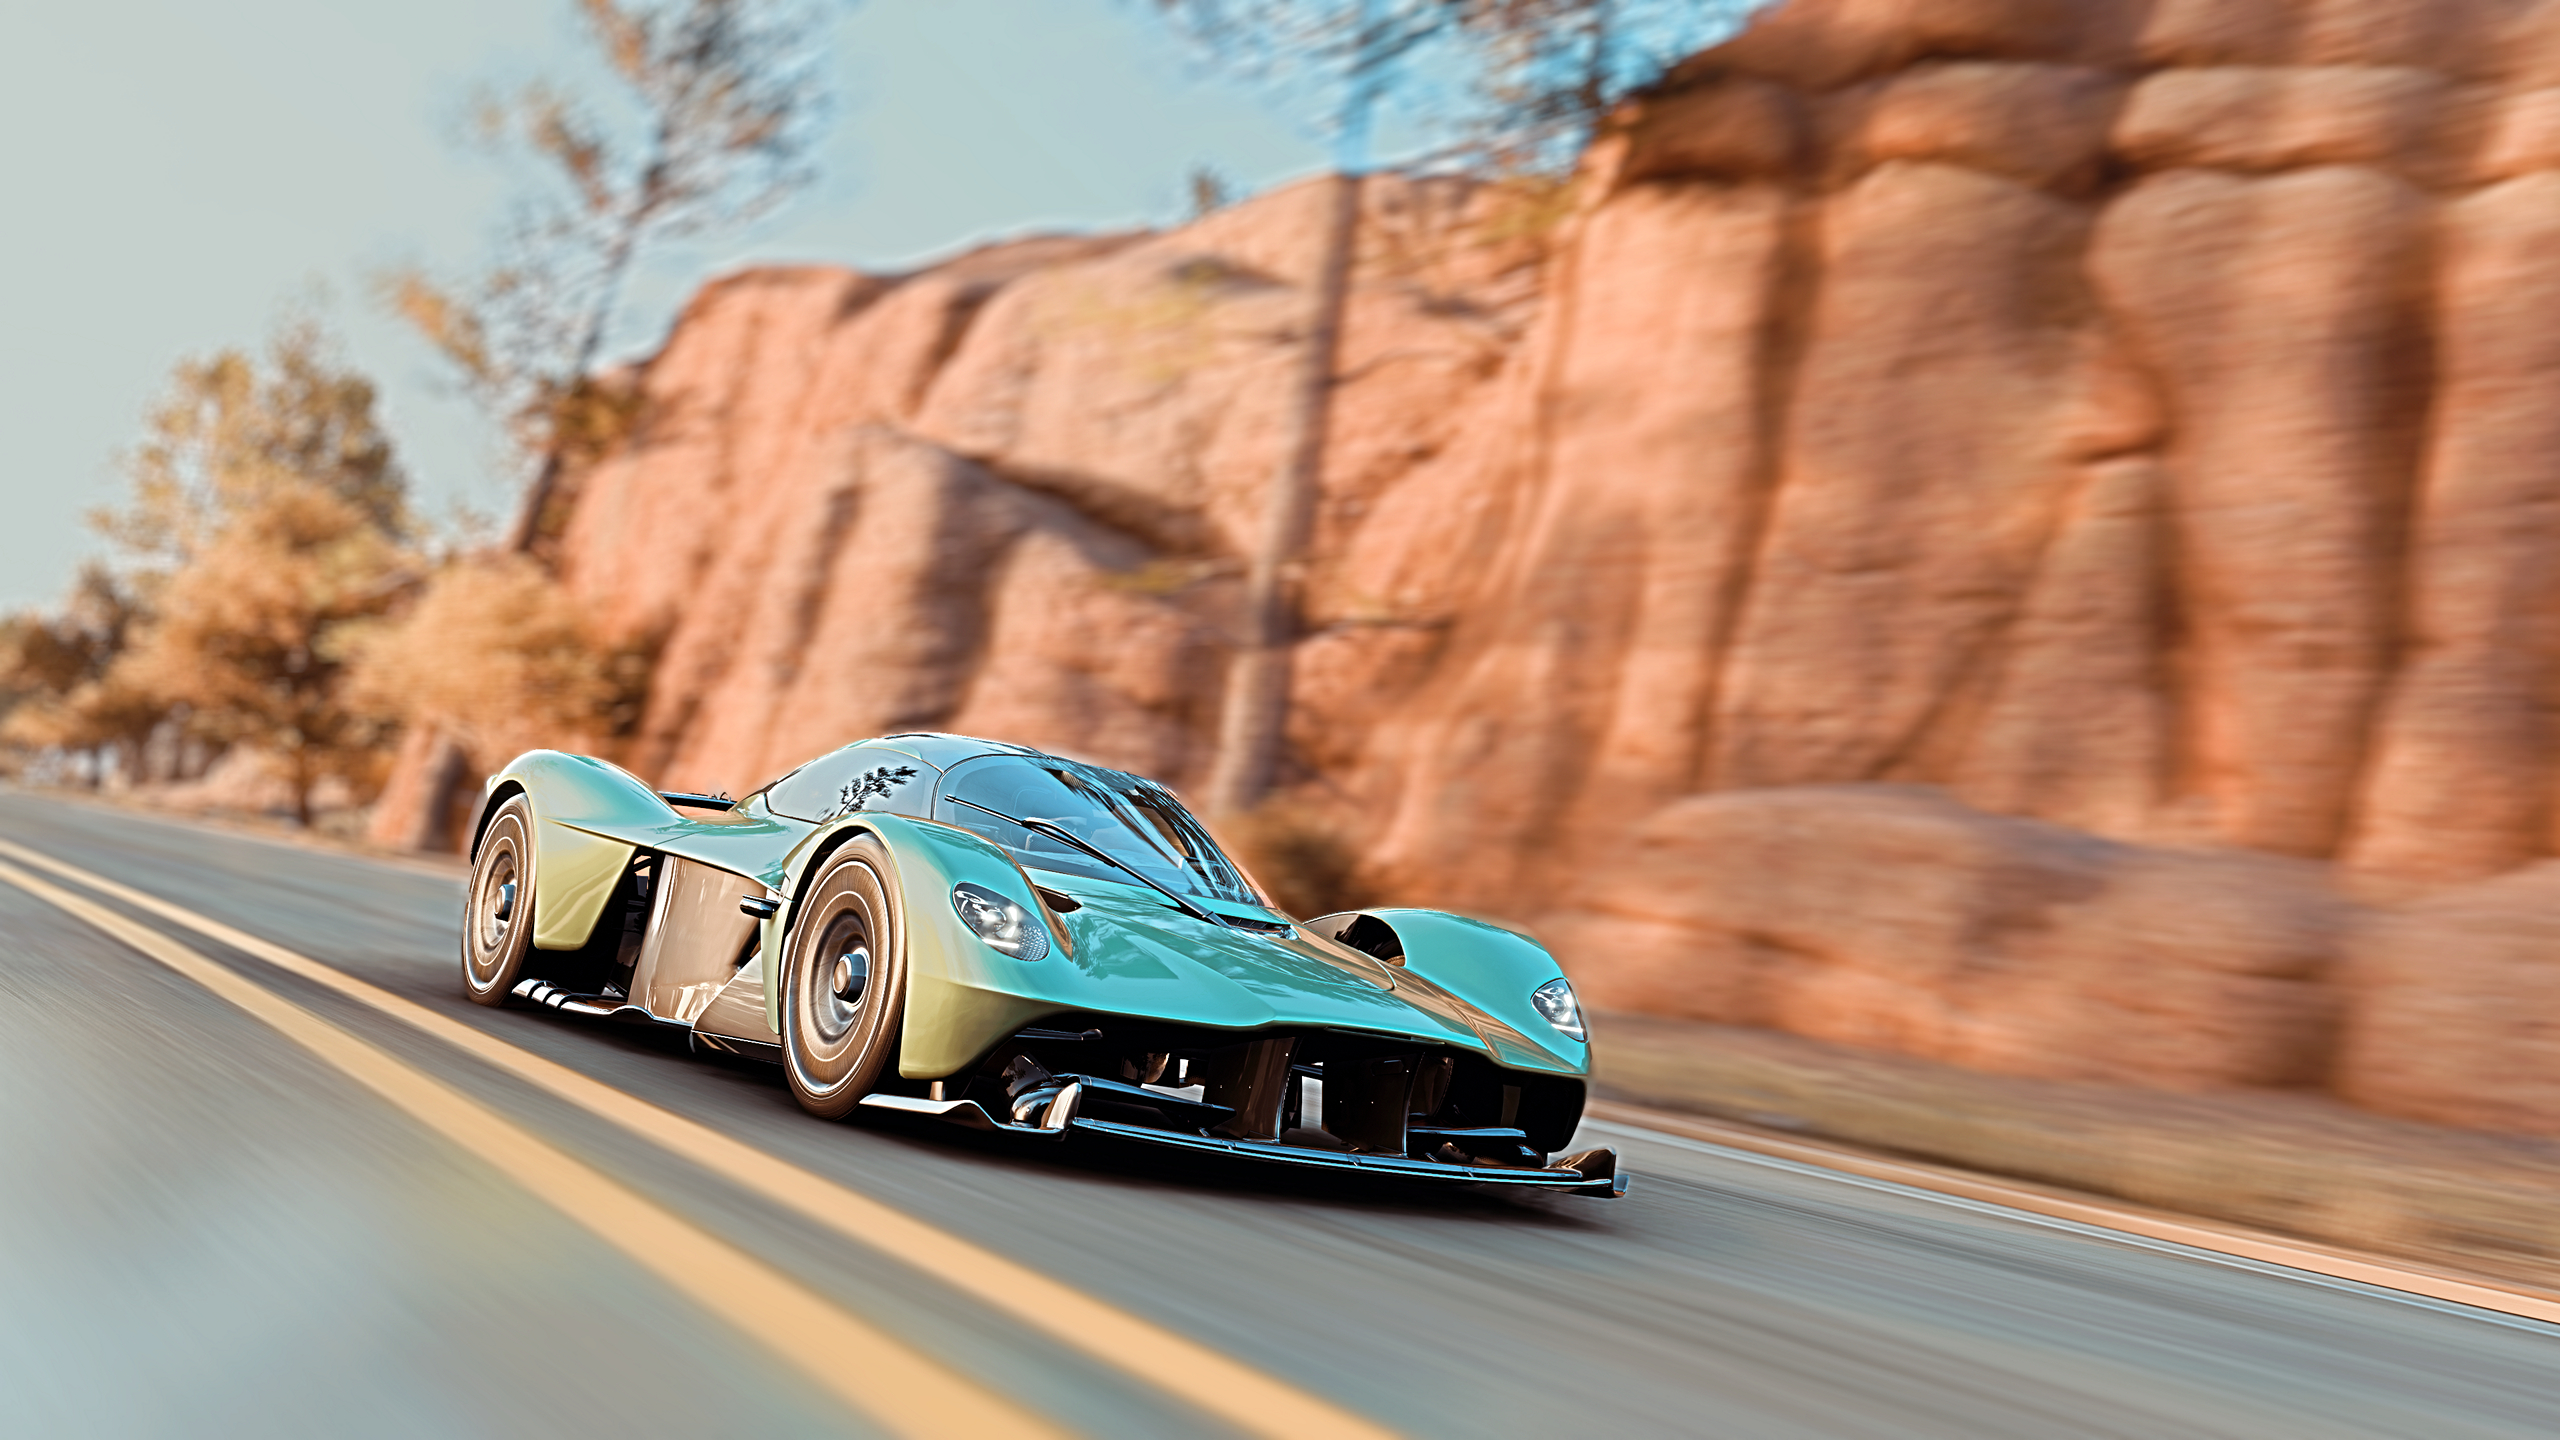 General 2560x1440 Forza Horizon 5 HDR sports car mountain pass speed-limit Aston Martin British cars Hypercar PlaygroundGames fall video games frontal view headlights motion blur video game art CGI road driving trees